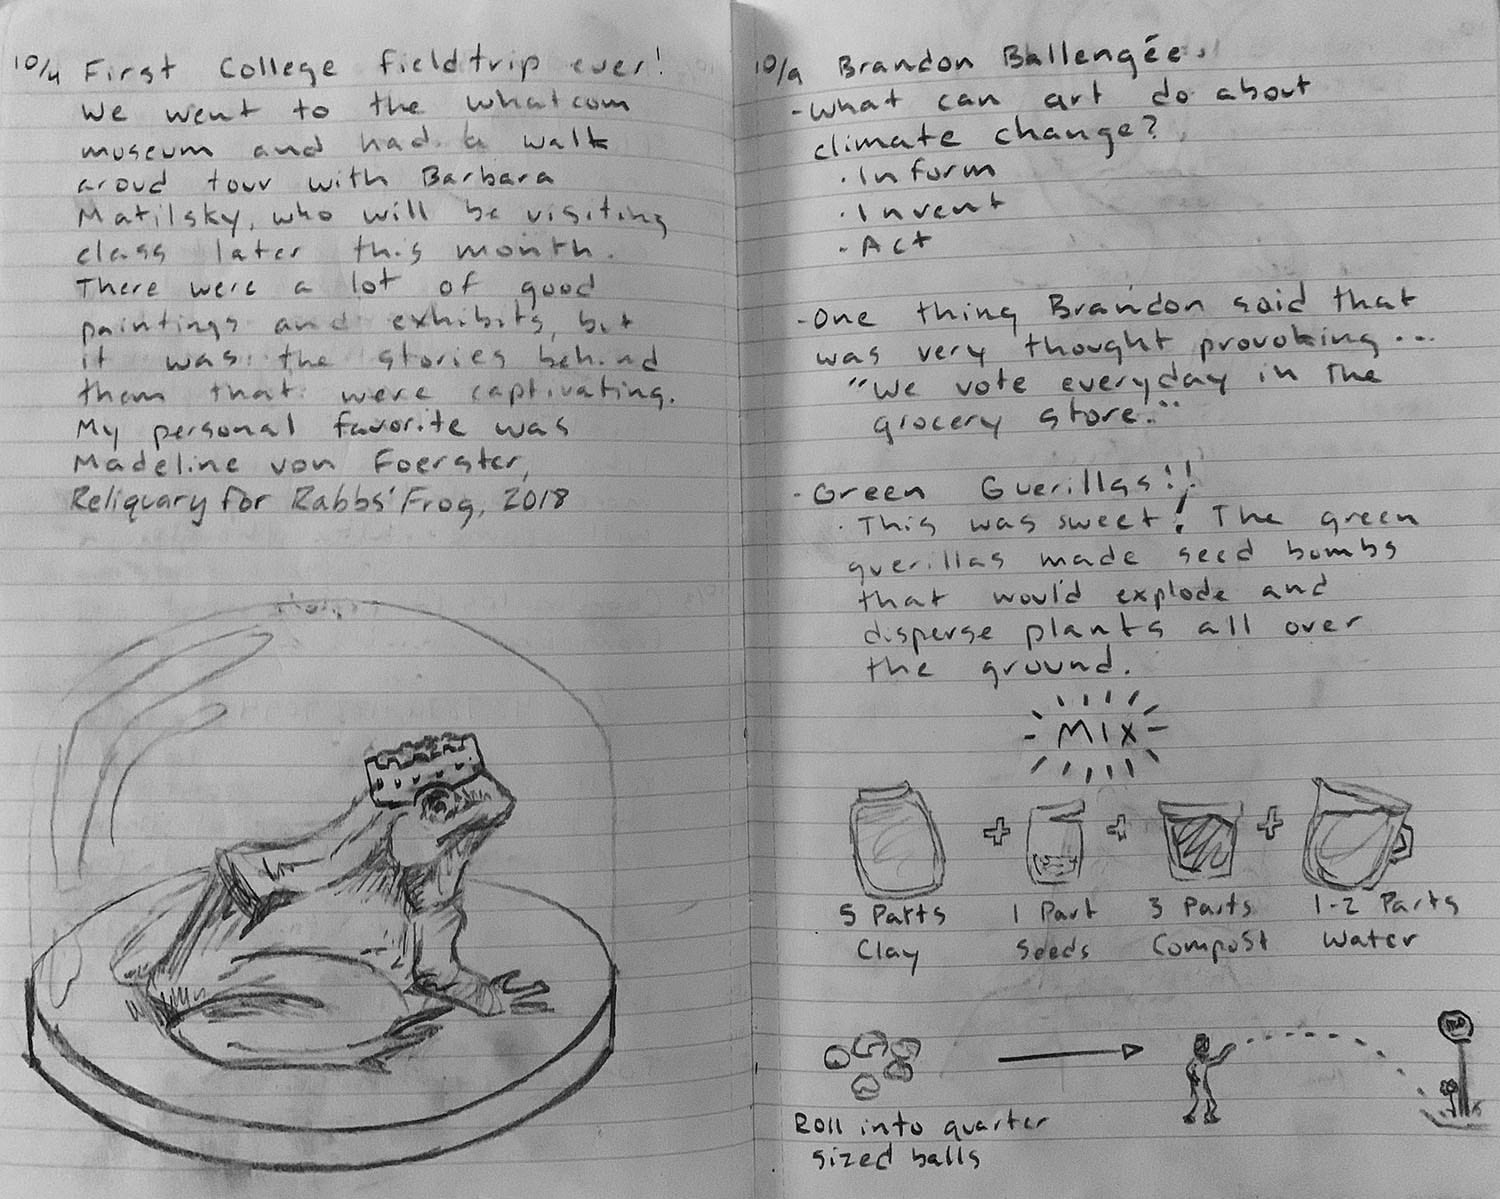 Two pages of notes with a hand drawn frog wearing a crown, and a recipe: 5 parts clay, 1 part seeds, 3 parts compost, 1-2 parts water, roll into quarter sized balls, and an arrow pointing to a person throwing something at a sign.